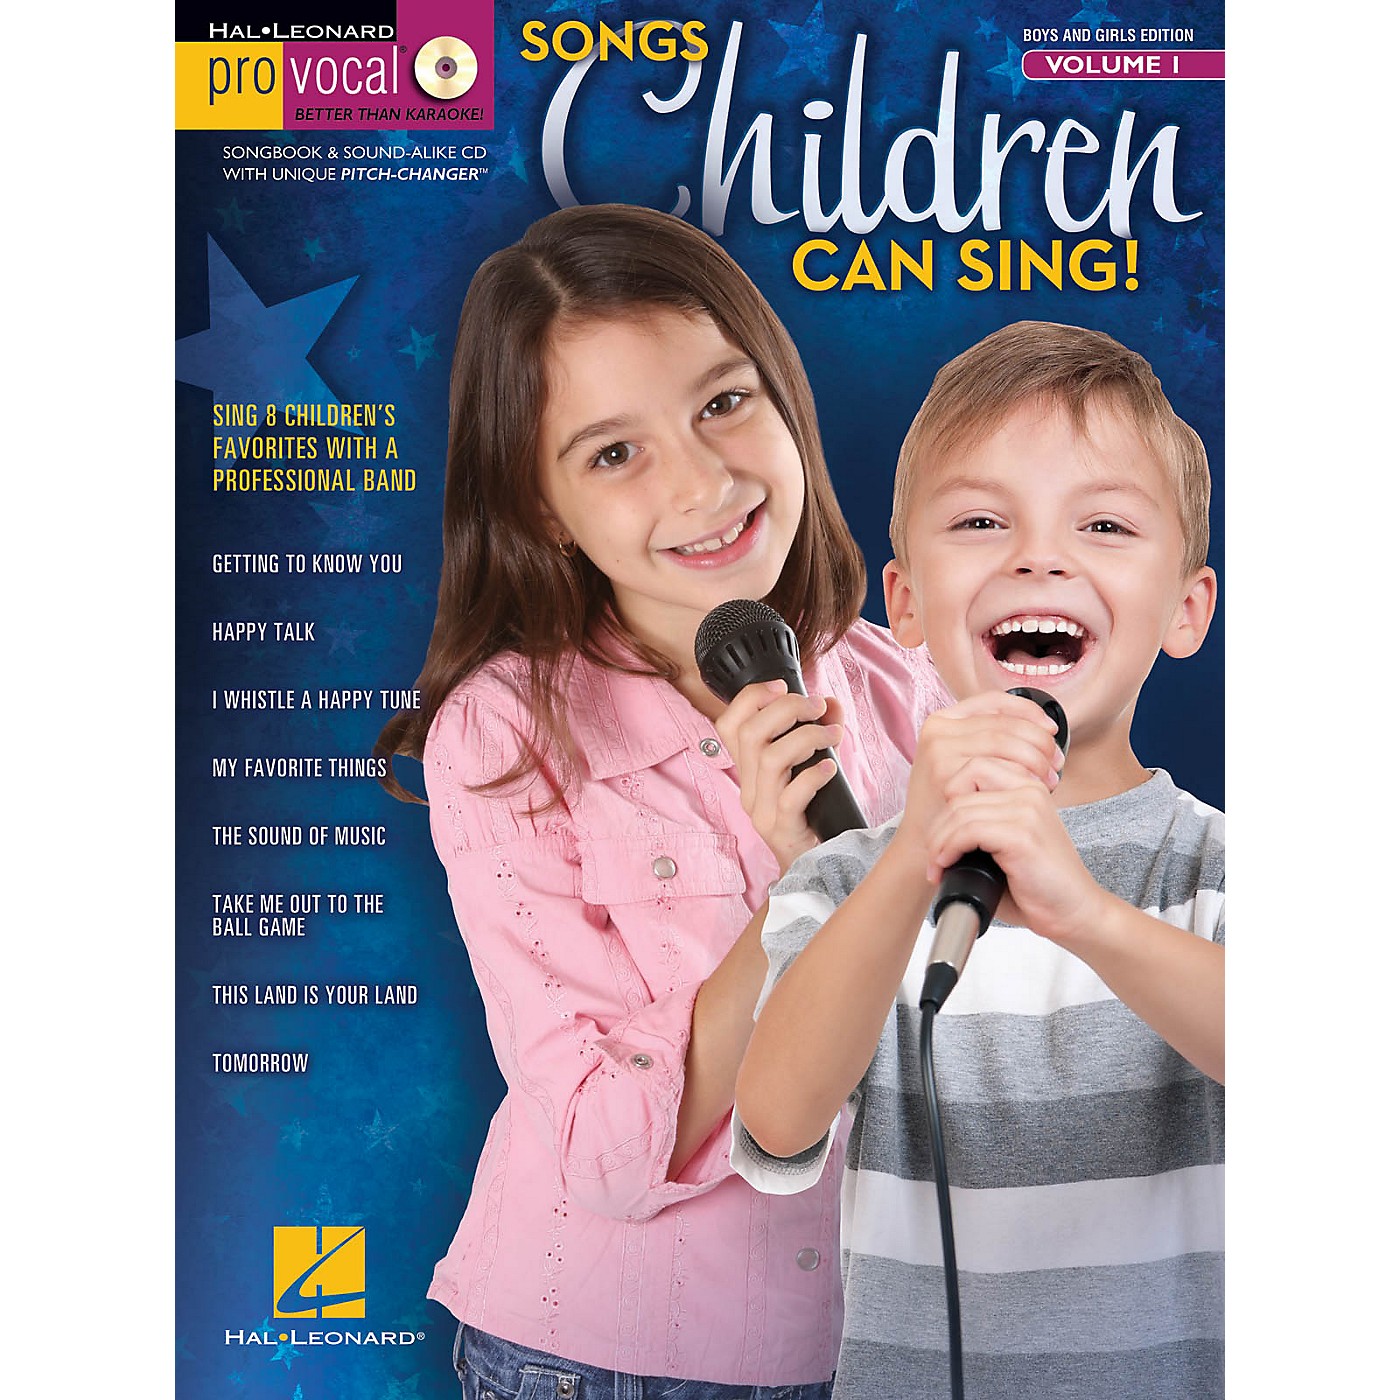 Hal Leonard Songs Children Can Sing! - Pro Vocal For Kids Vol. 1 (For Boys And Girls) Book/CD thumbnail